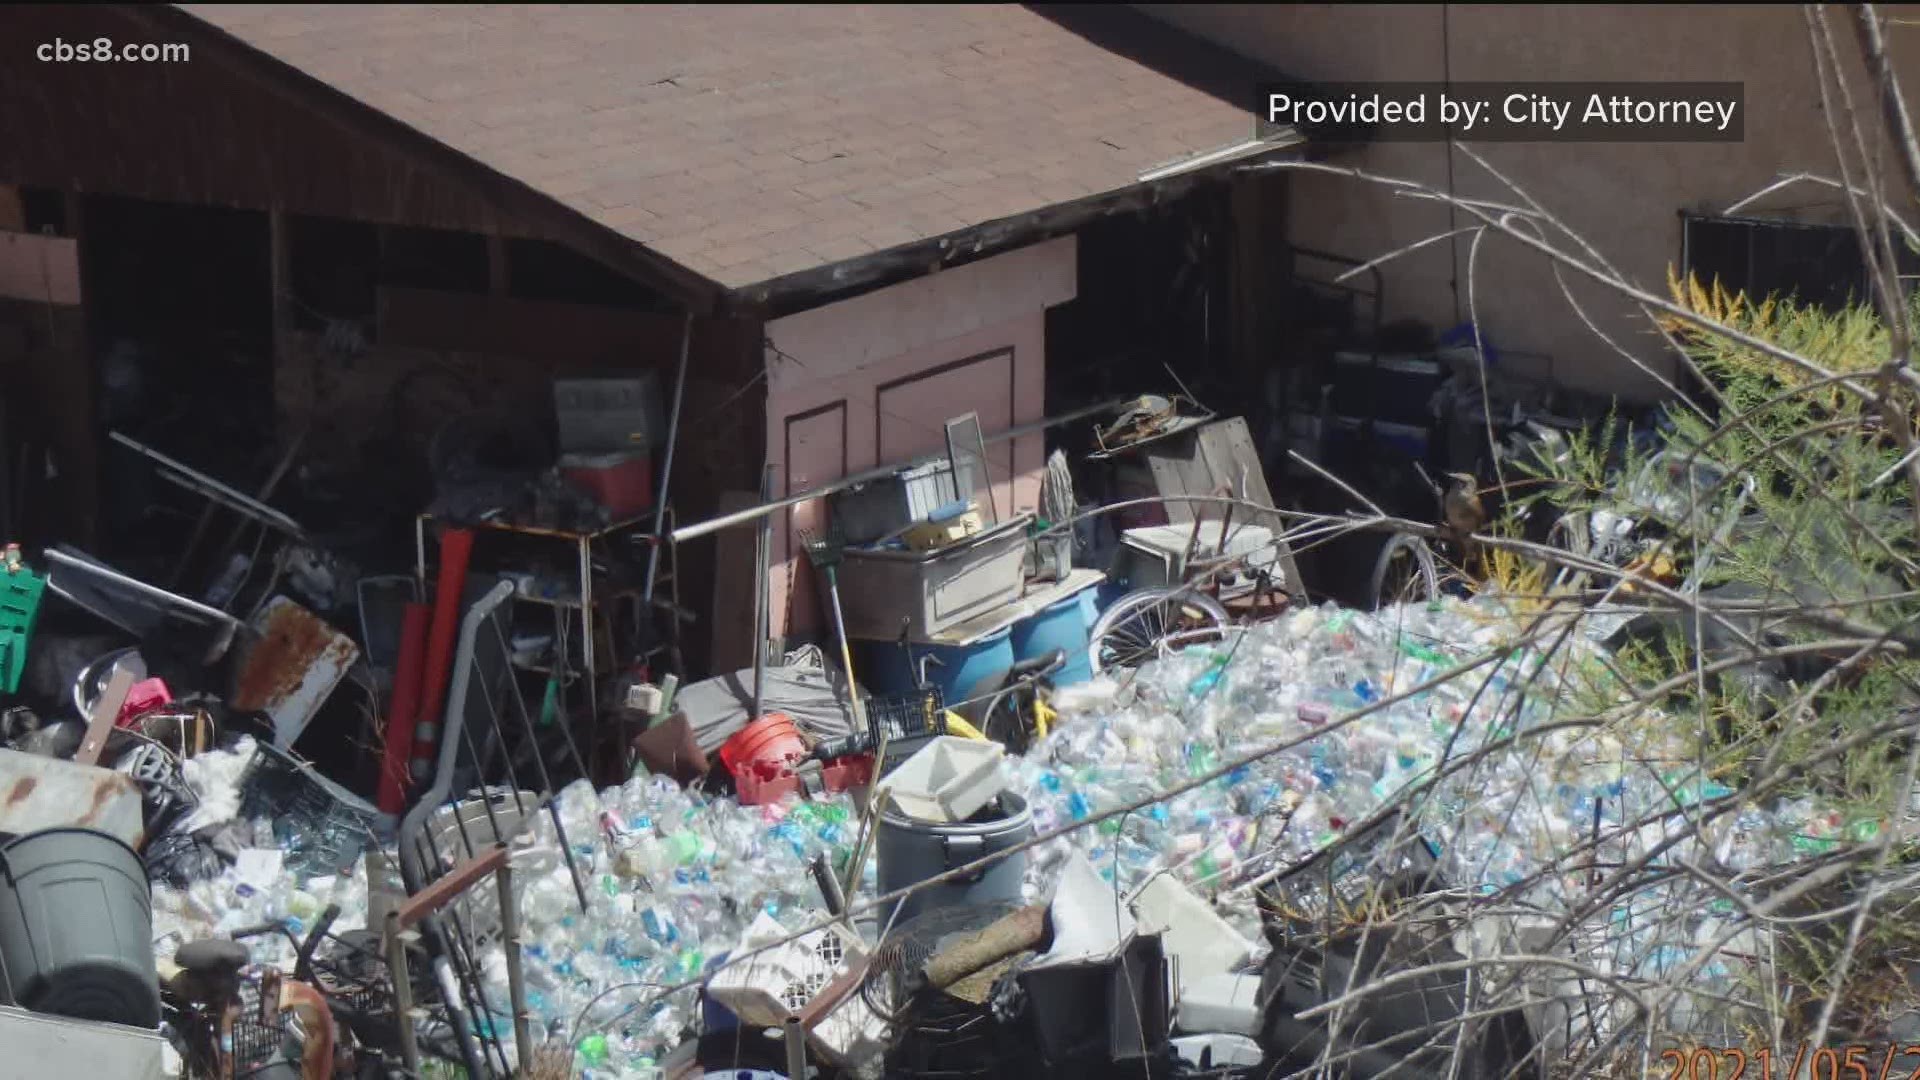 Neighbors are complaining about the stench of urine and feces coming from a home in Bay Terraces piled high with trash.